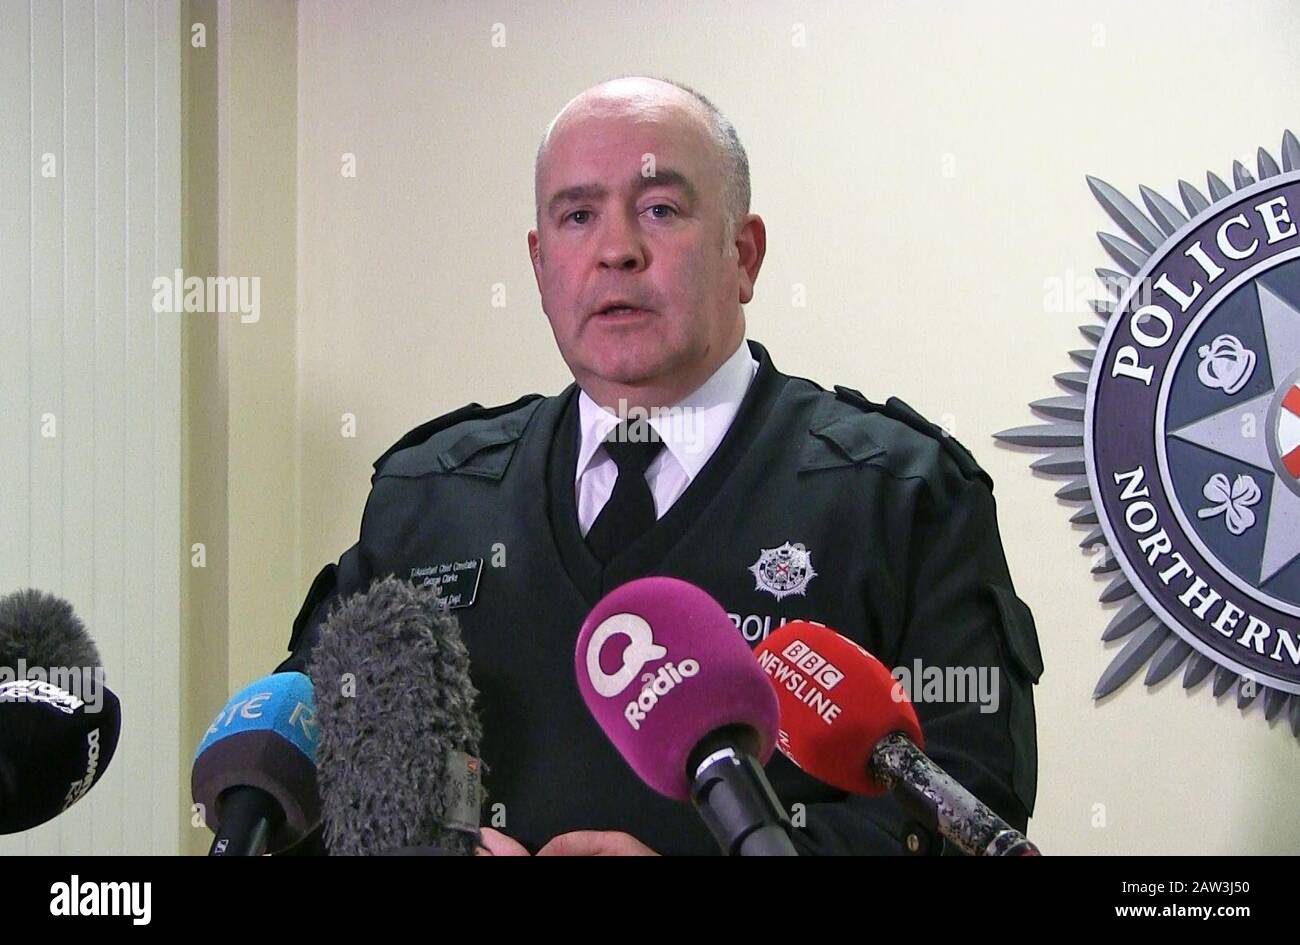 PSNI Assistant Chief Constable George Clarke who has said that the "carnage" that could have been caused if a device that was found on a heavy goods vehicle in Co Armagh earlier this week had exploded was worrying to contemplate. Stock Photo